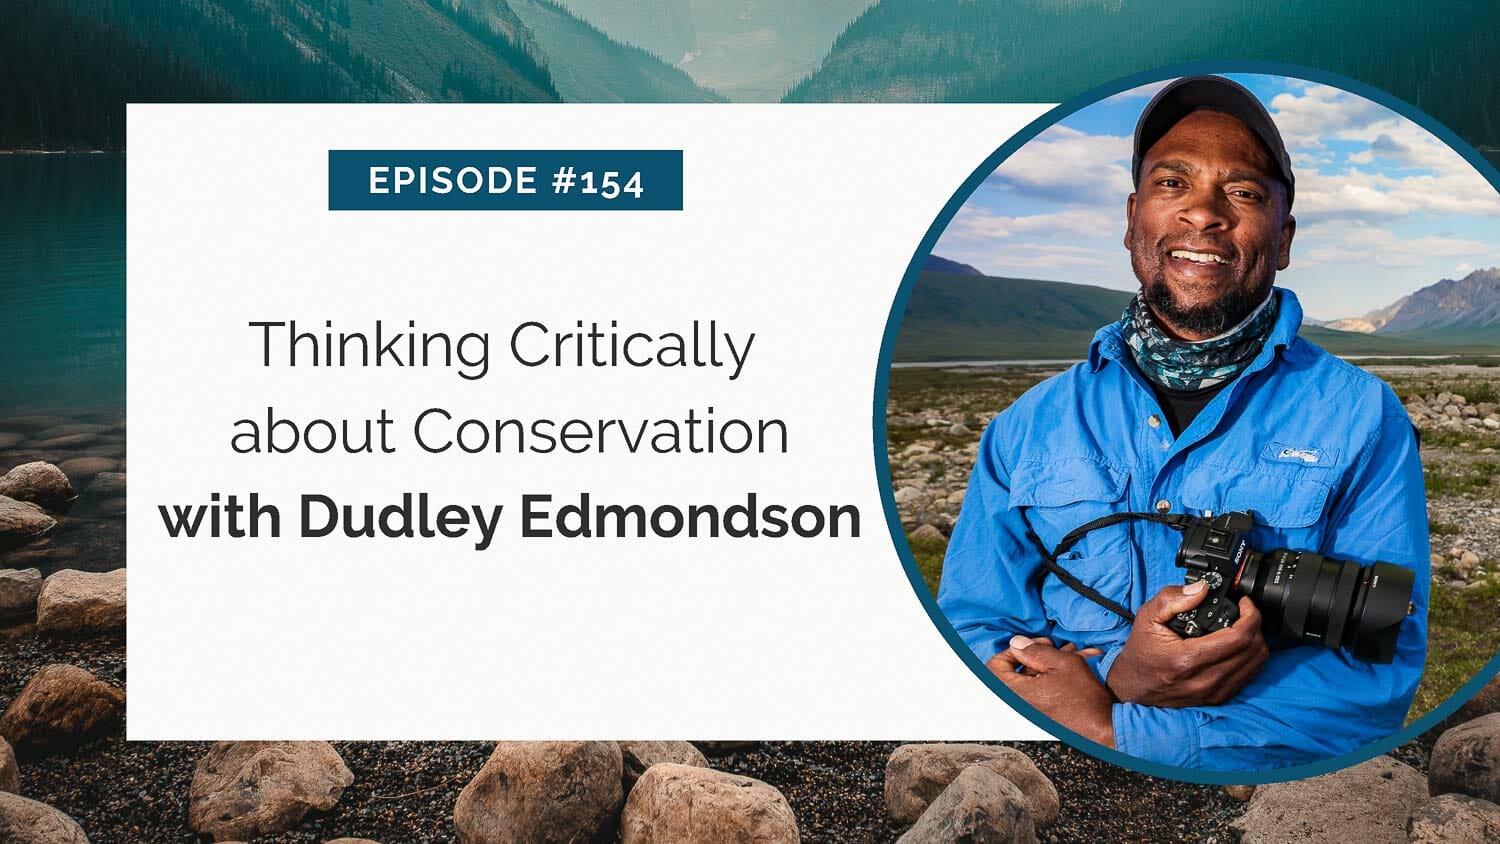 Conservation-focused episode featuring dudley edmondson with camera, set against a backdrop of a serene mountain lake.